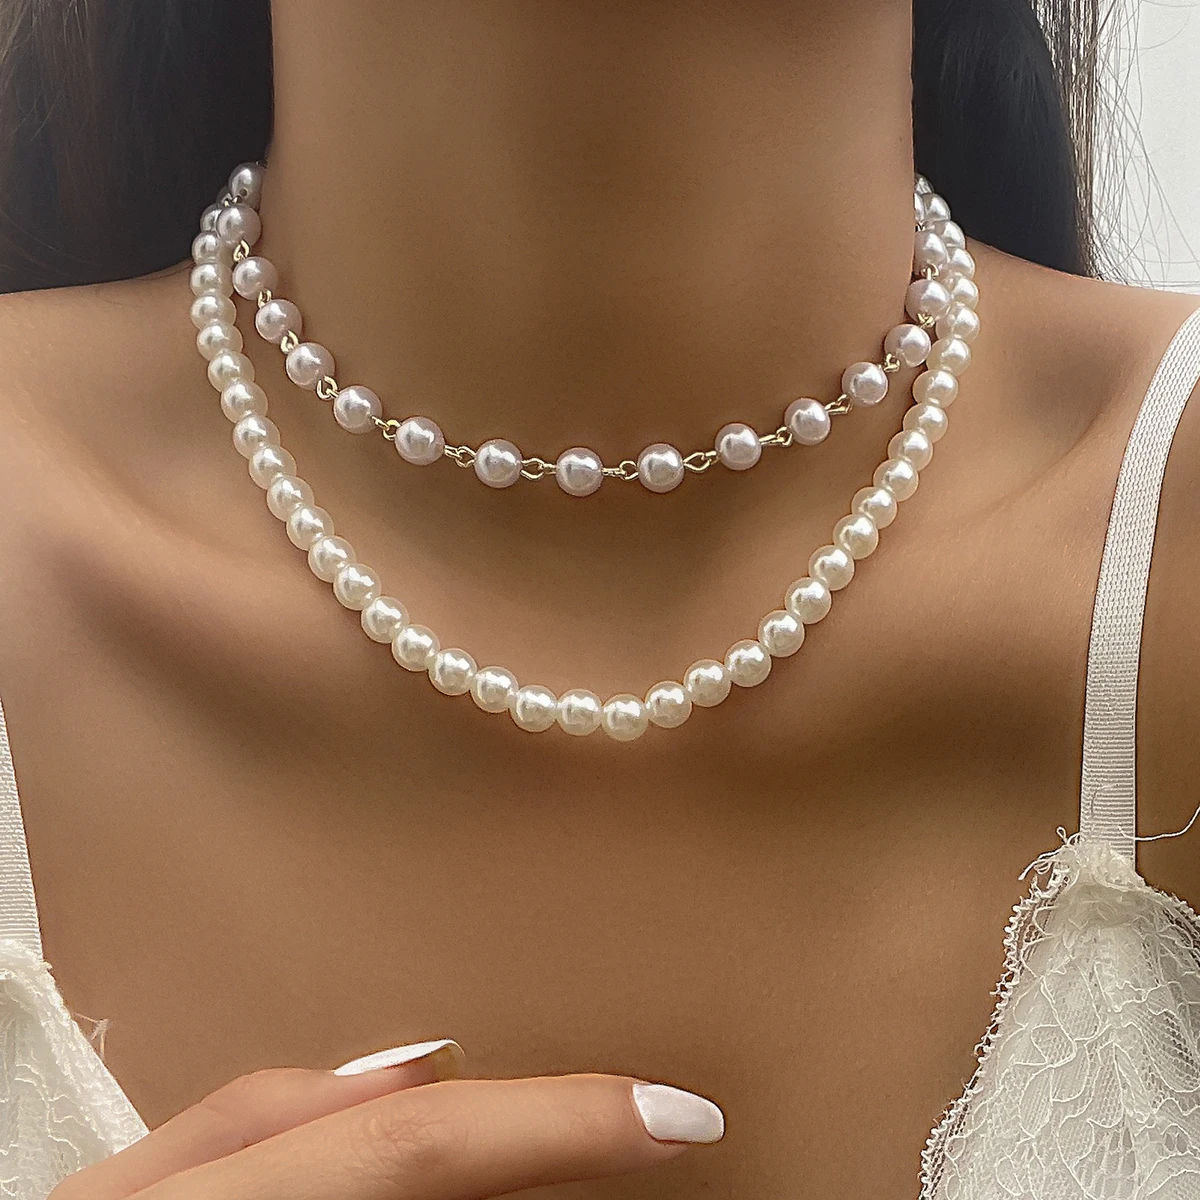 

2pcs/Set Retro Elegant Simulated Pearls Necklace For Women Handmade Beaded Multi Layer Clavicle Chain Choker Necklace Jewelry